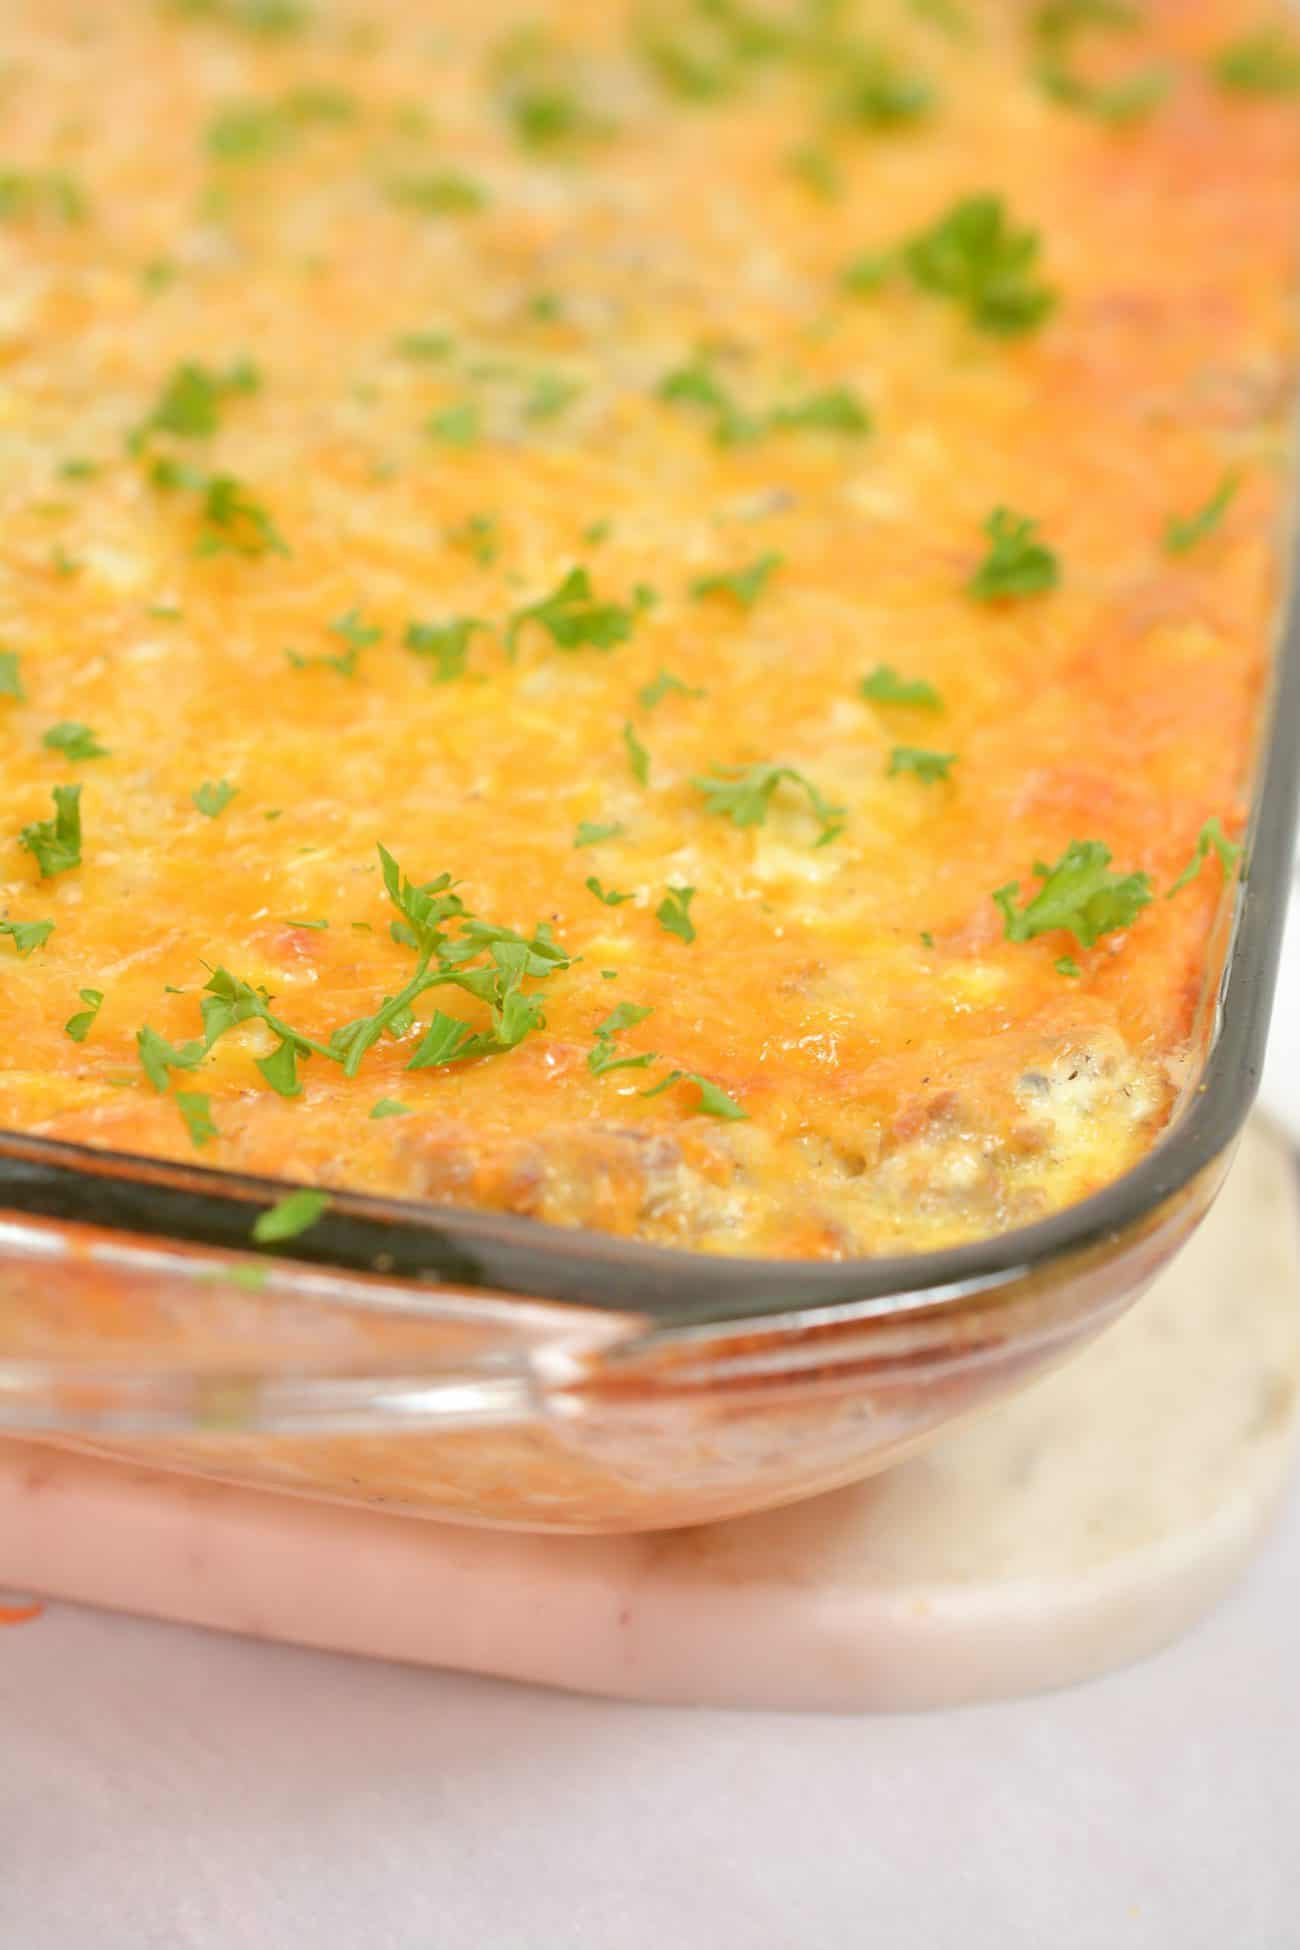 Sausage, Egg and Cream Cheese Hashbrown Casserole